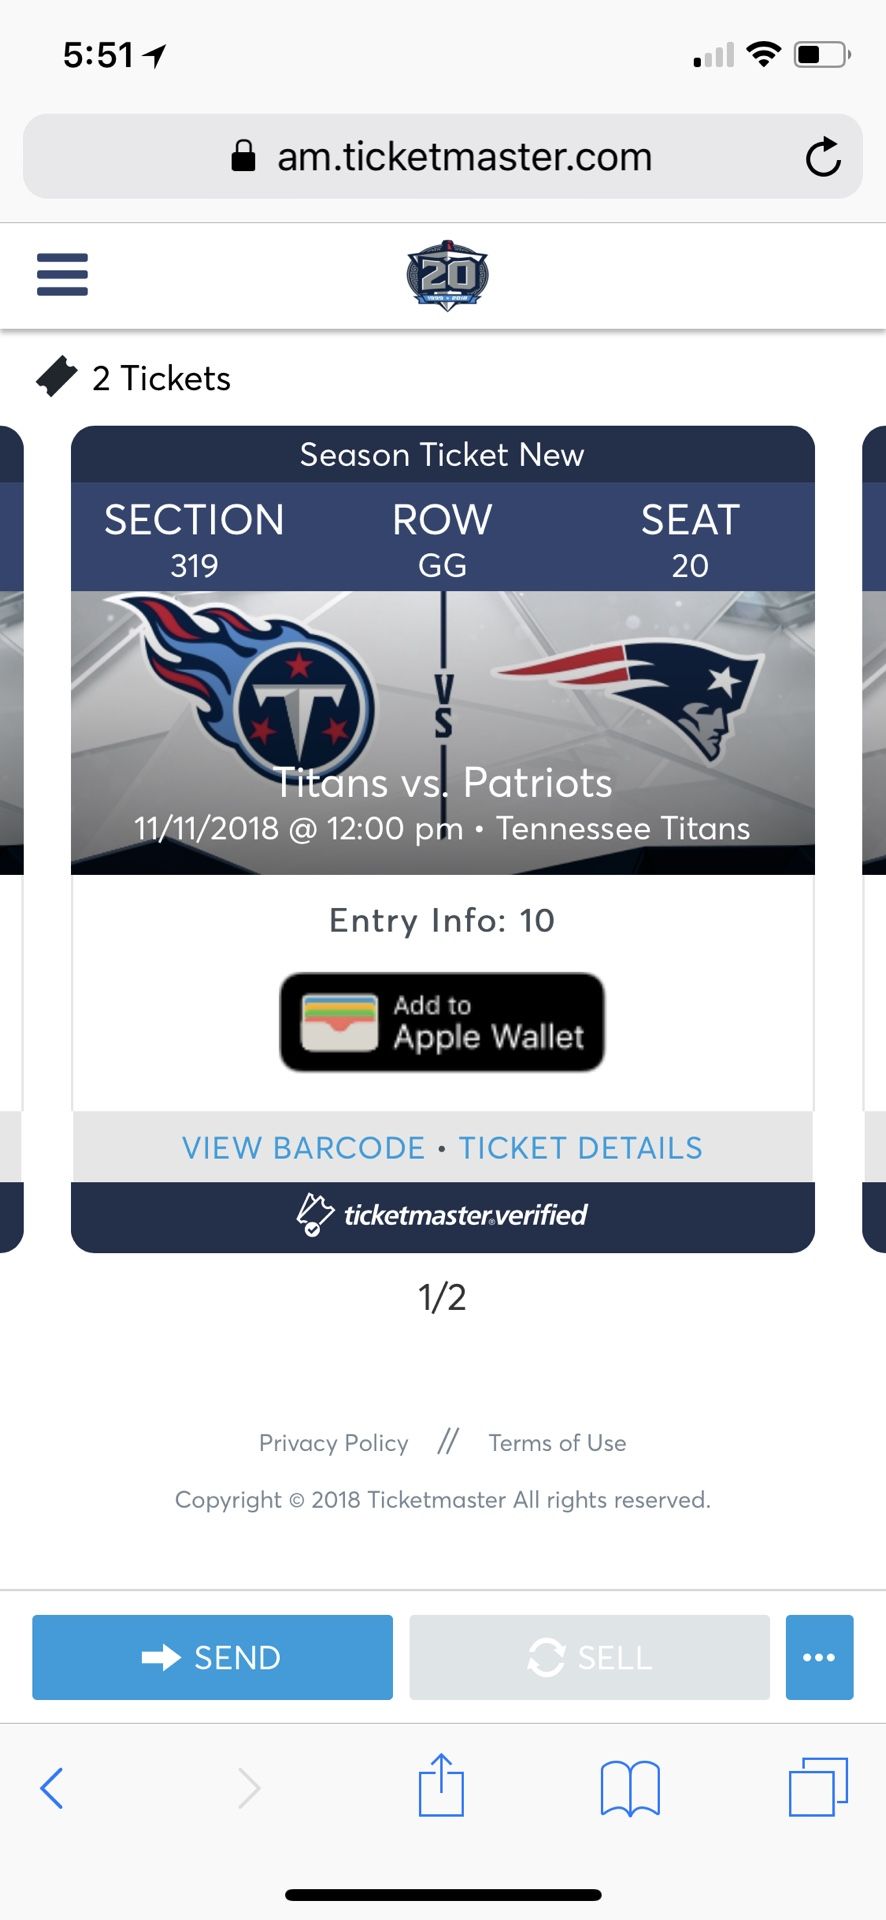 2 tickets to the Patriots vs Titans game on 11/11